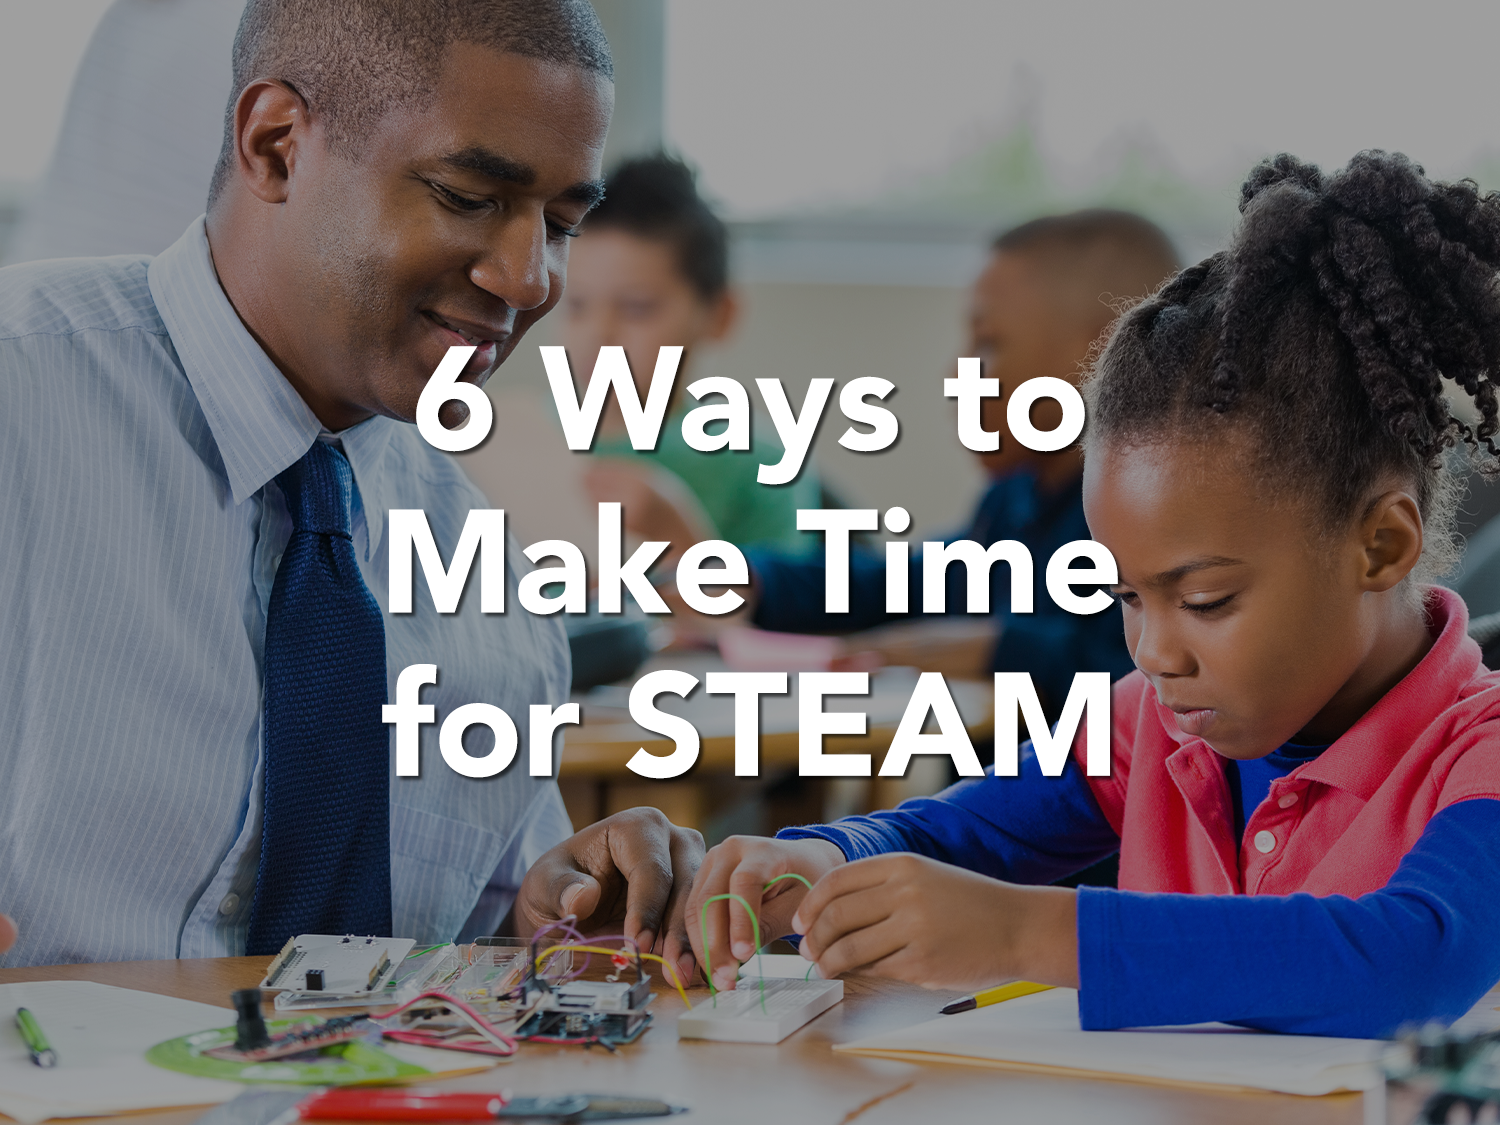 There are so many ways to make STEAM more manageable time-wise! In this article, we share six ways you can make time for STEAM in your school.